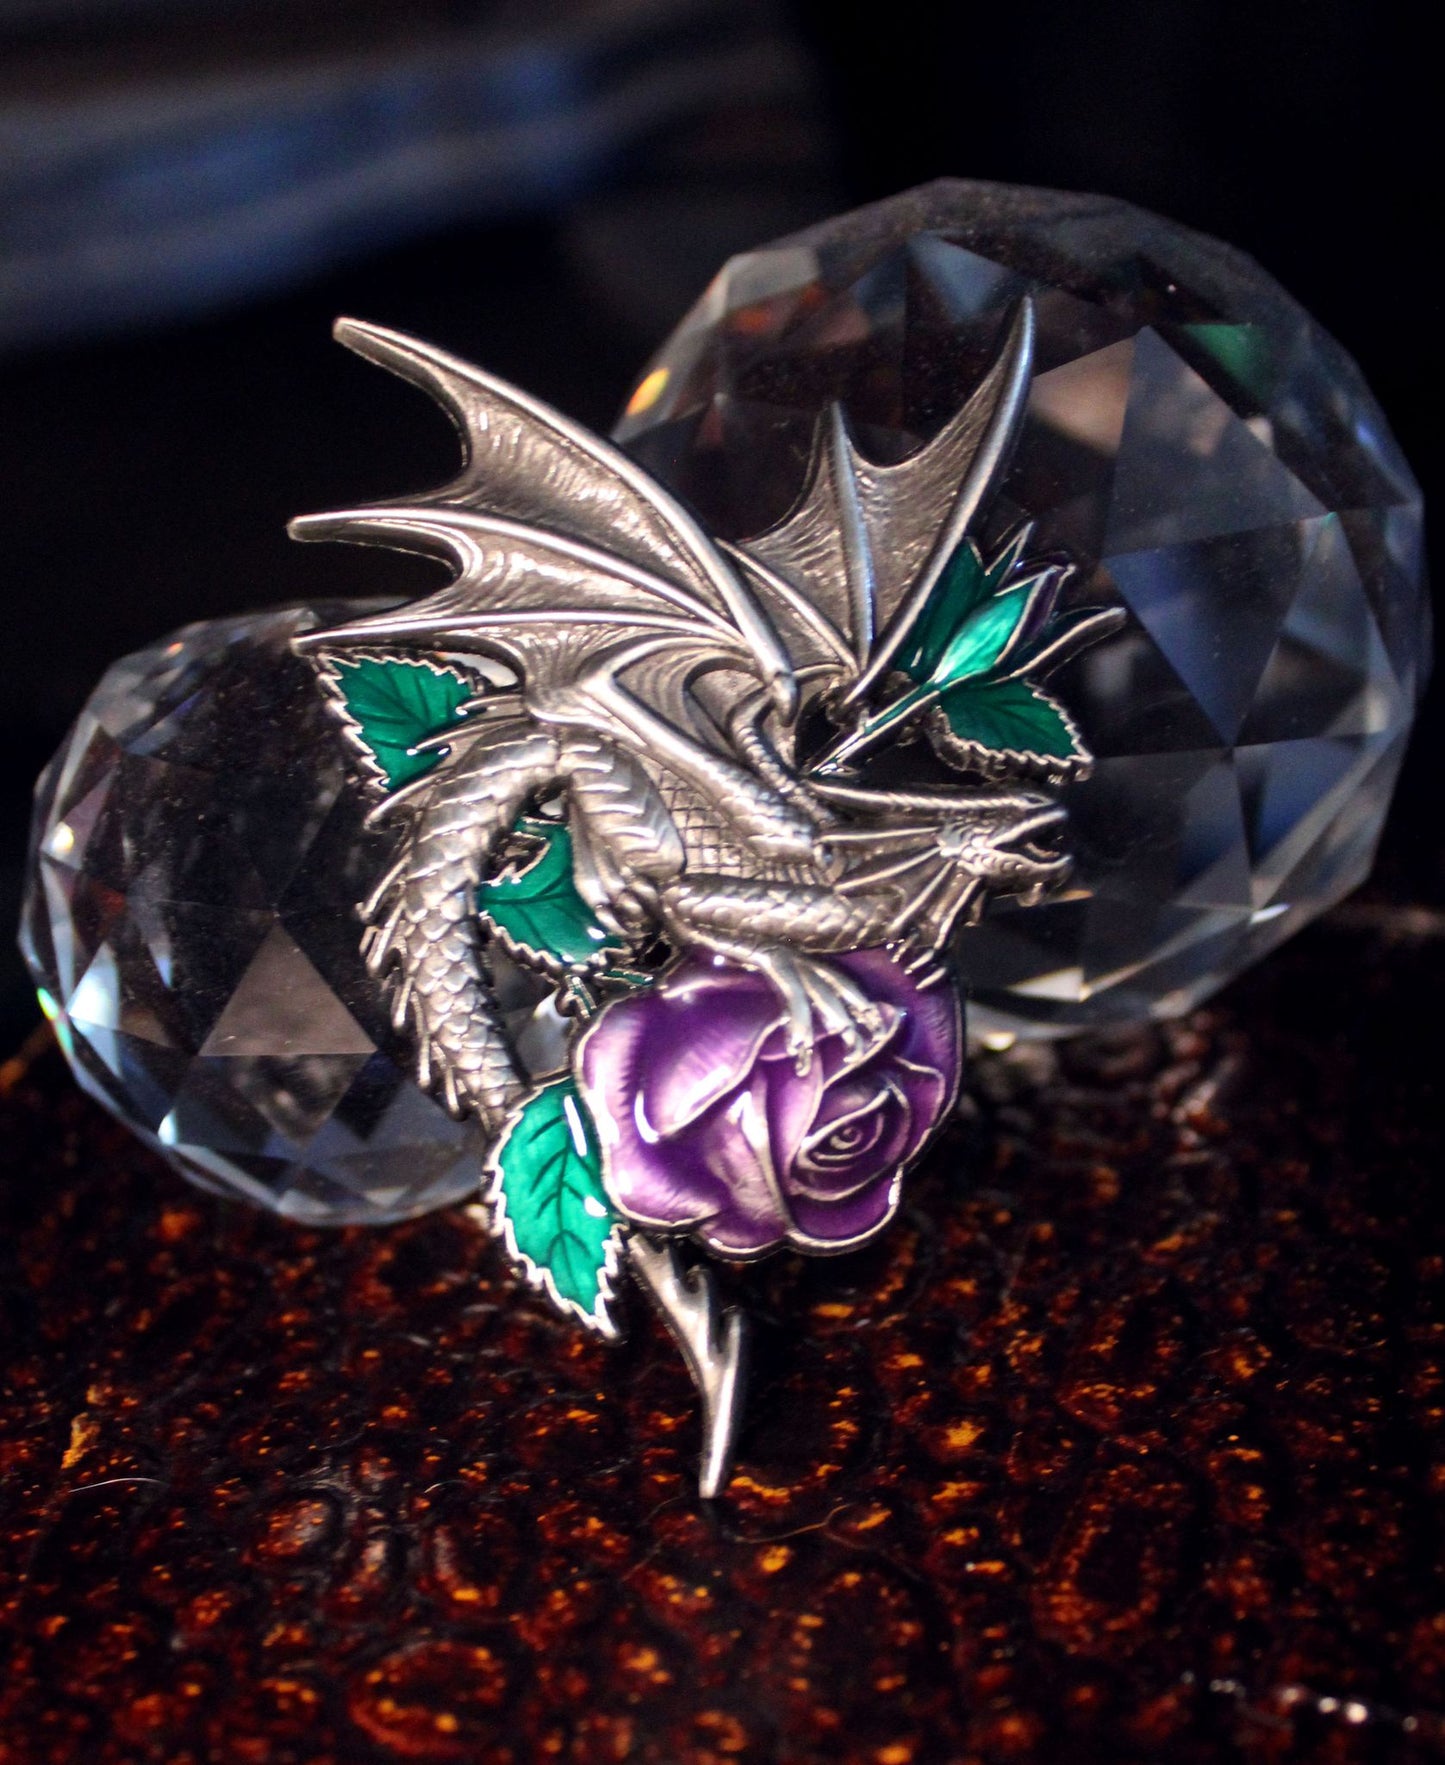 Dragon Beauty af Anne Stokes, Pin Badge